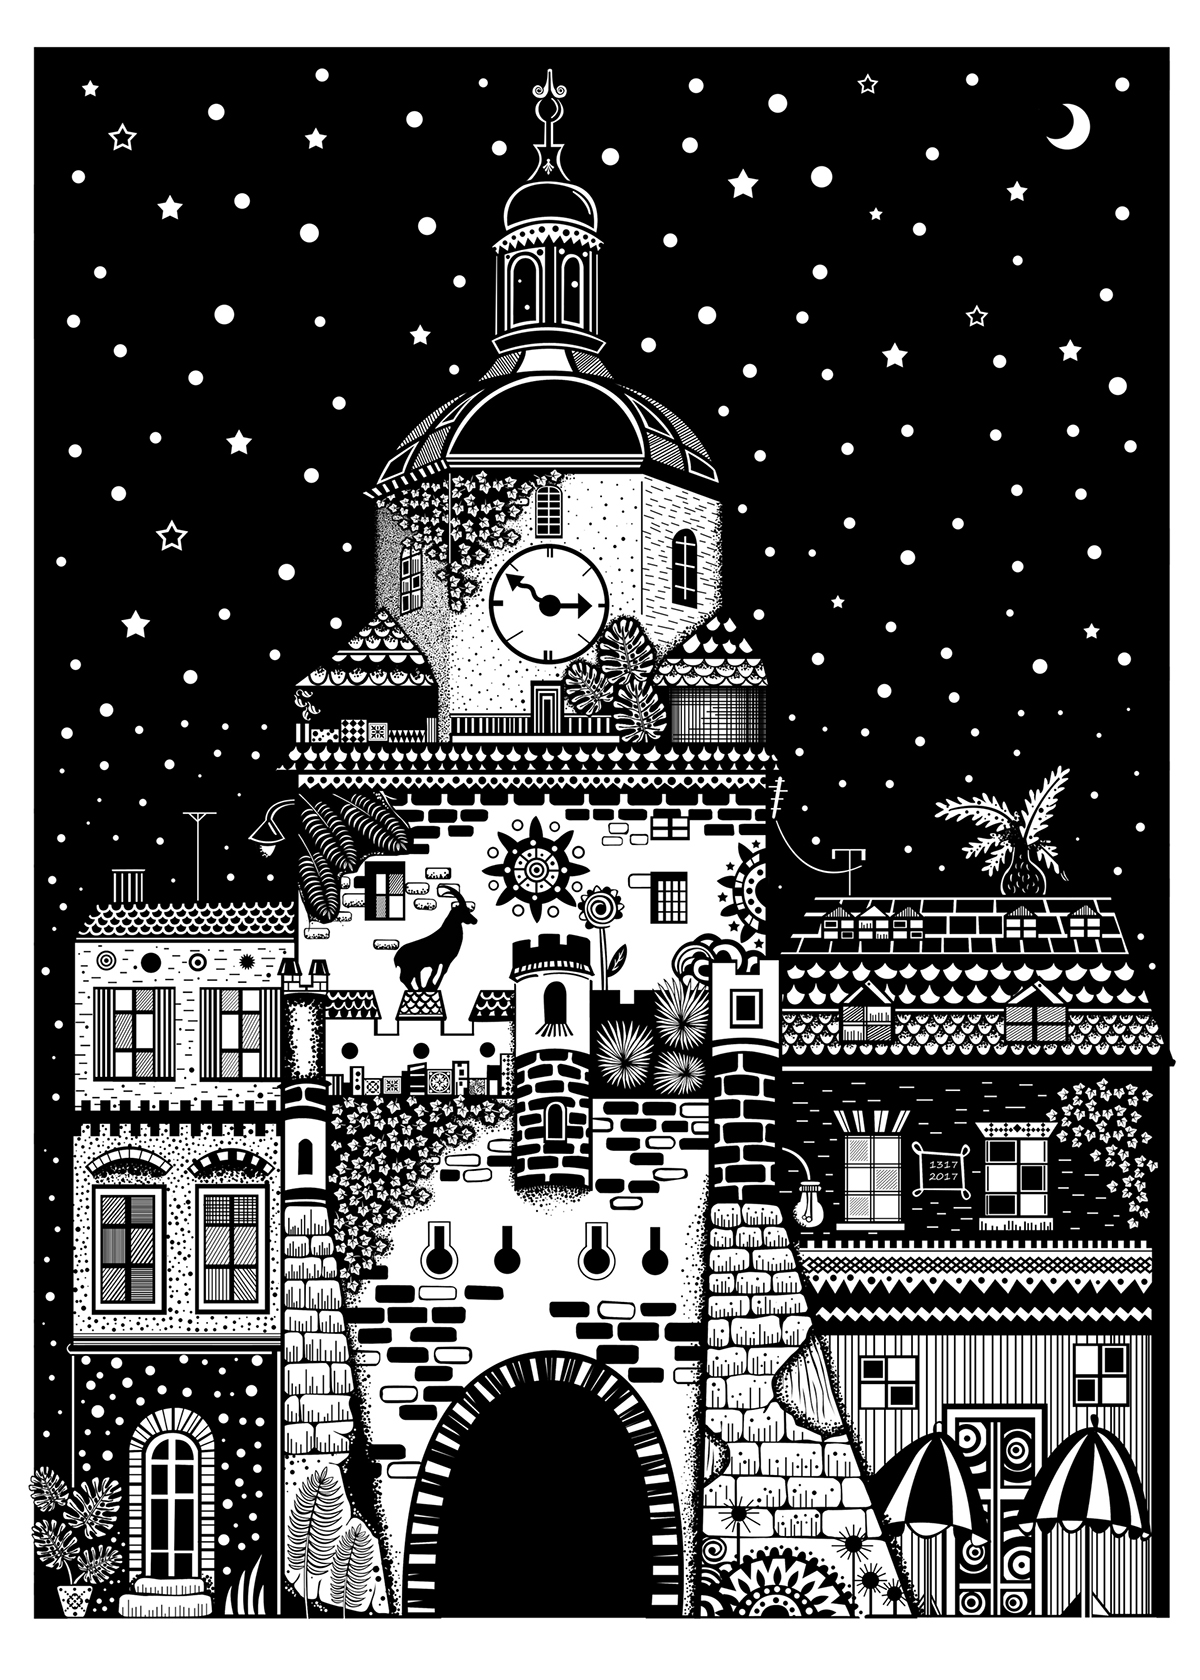 ILLUSTRATION  lublin city architecture graphic drawings screen printing plants black & white night